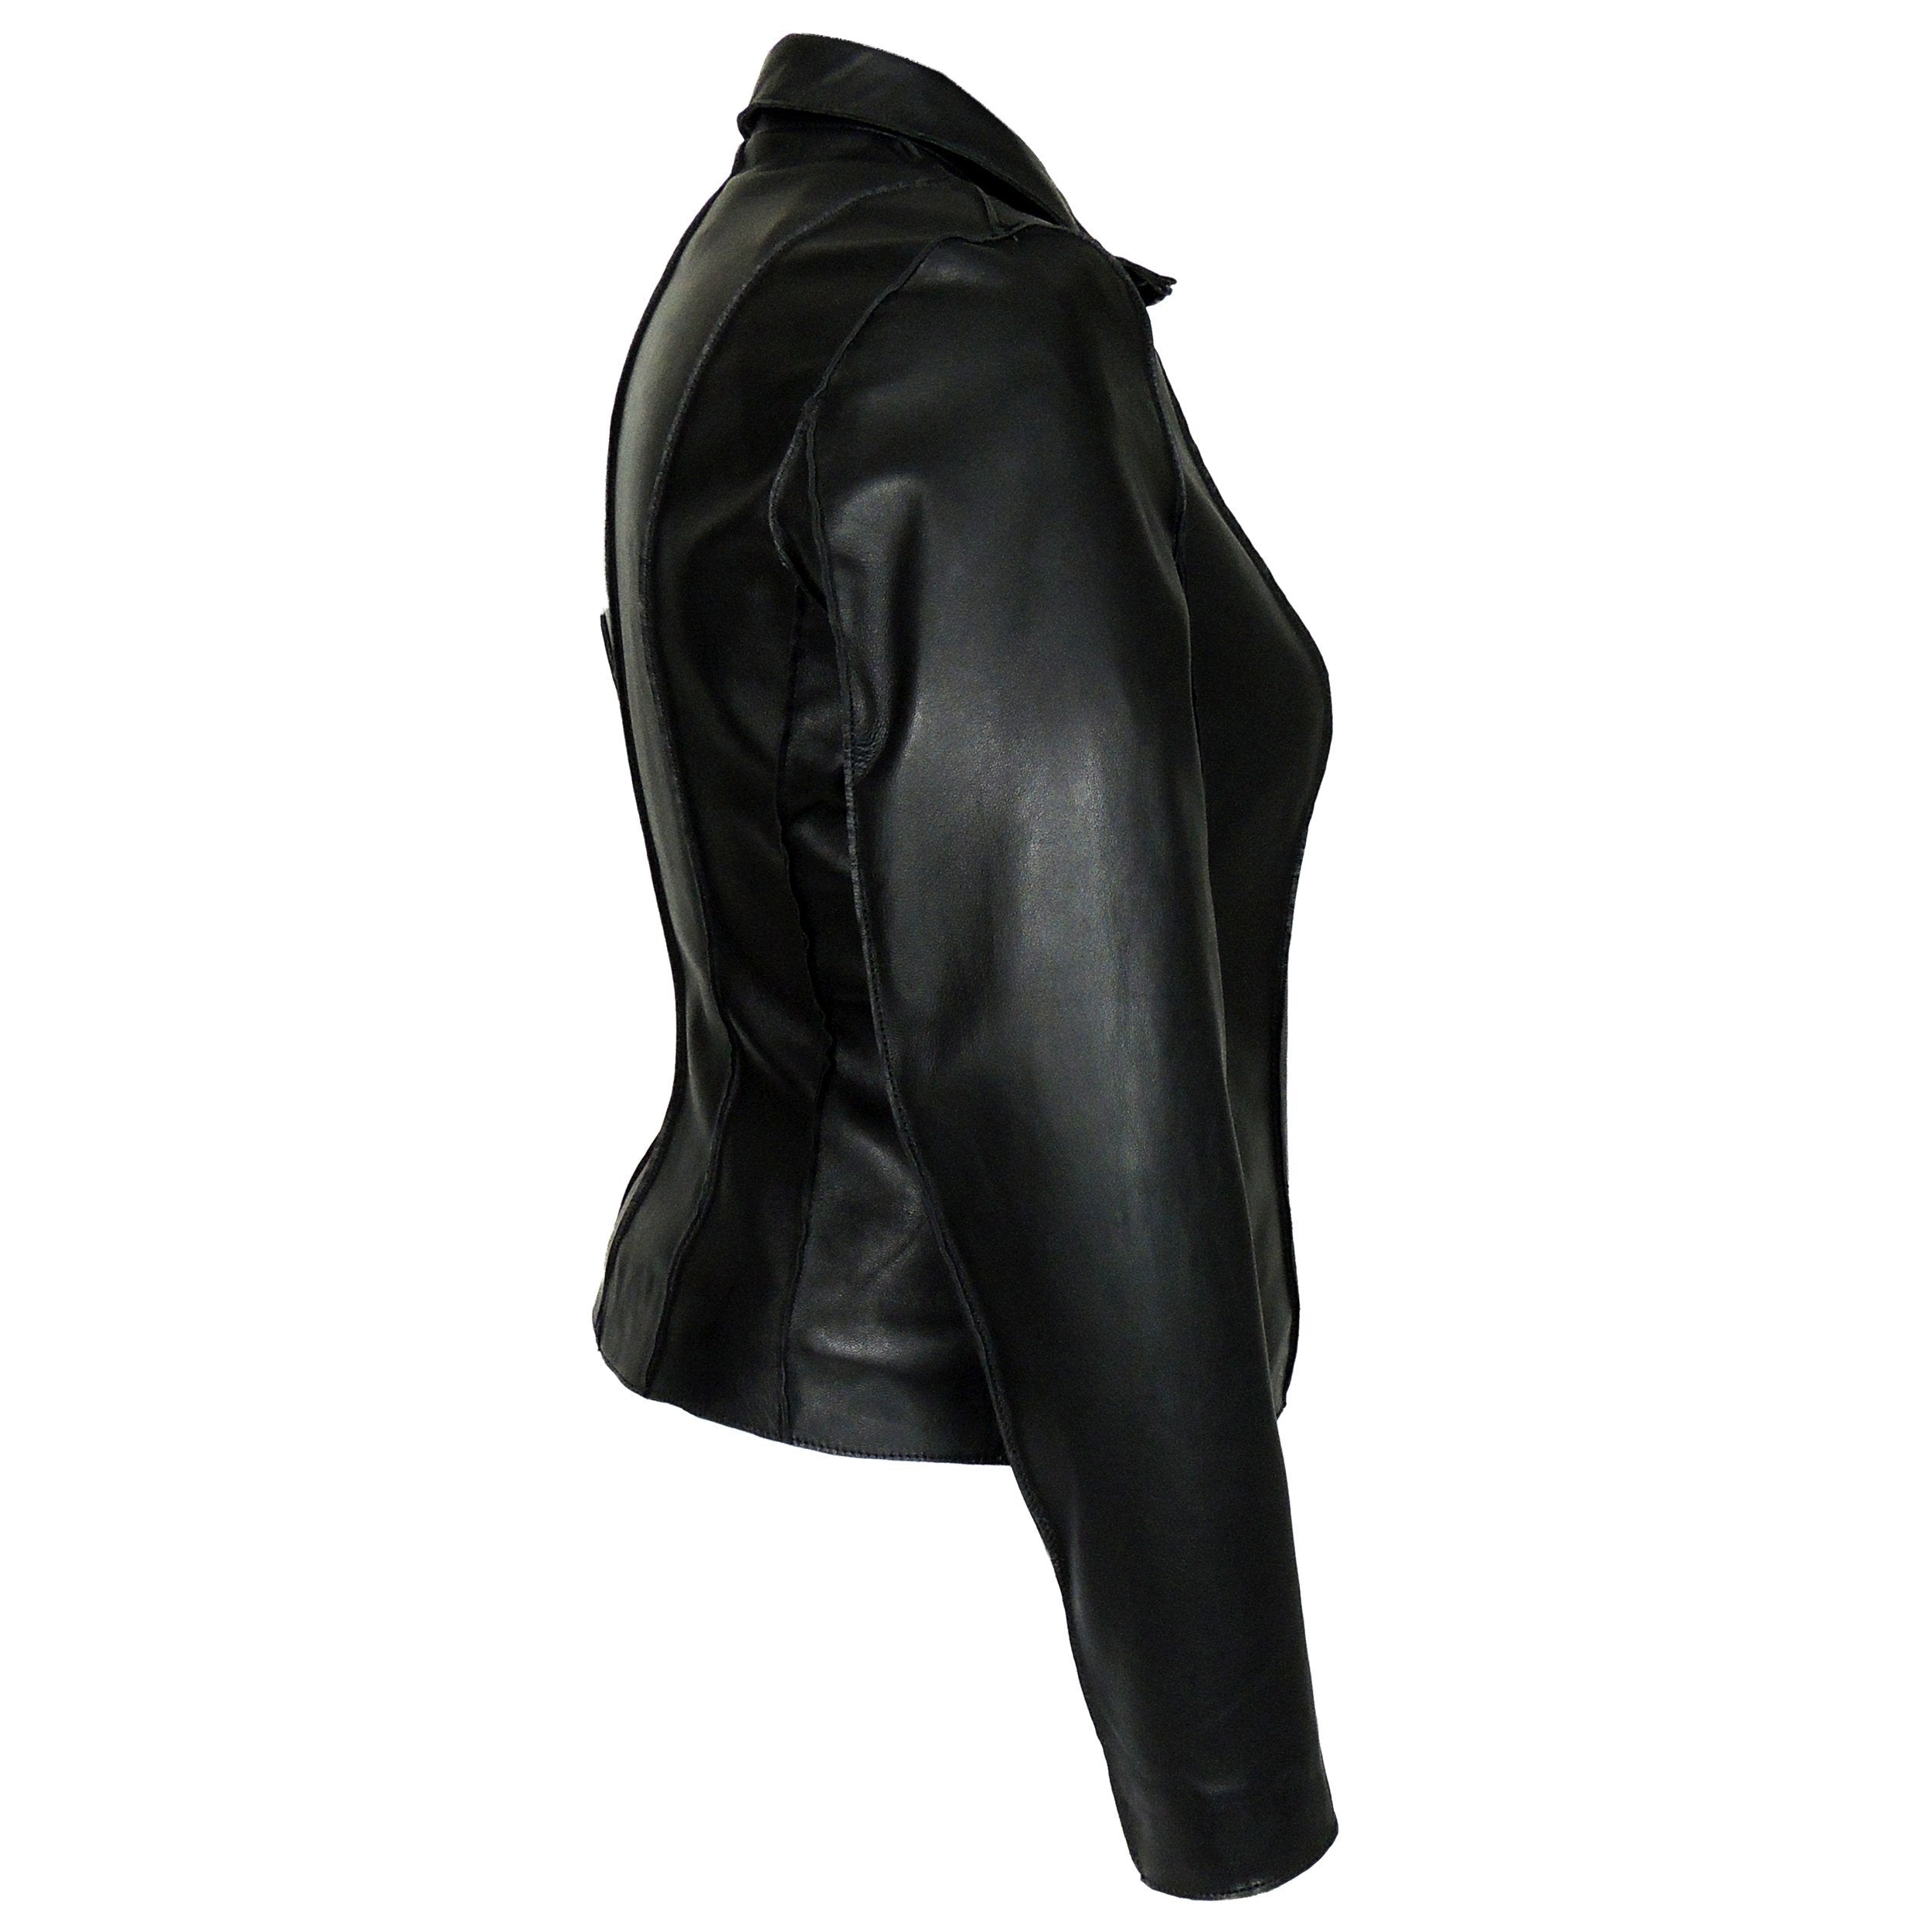 Picture of a Women's Professional Stunner Sheepskin Leather Jacket side view black